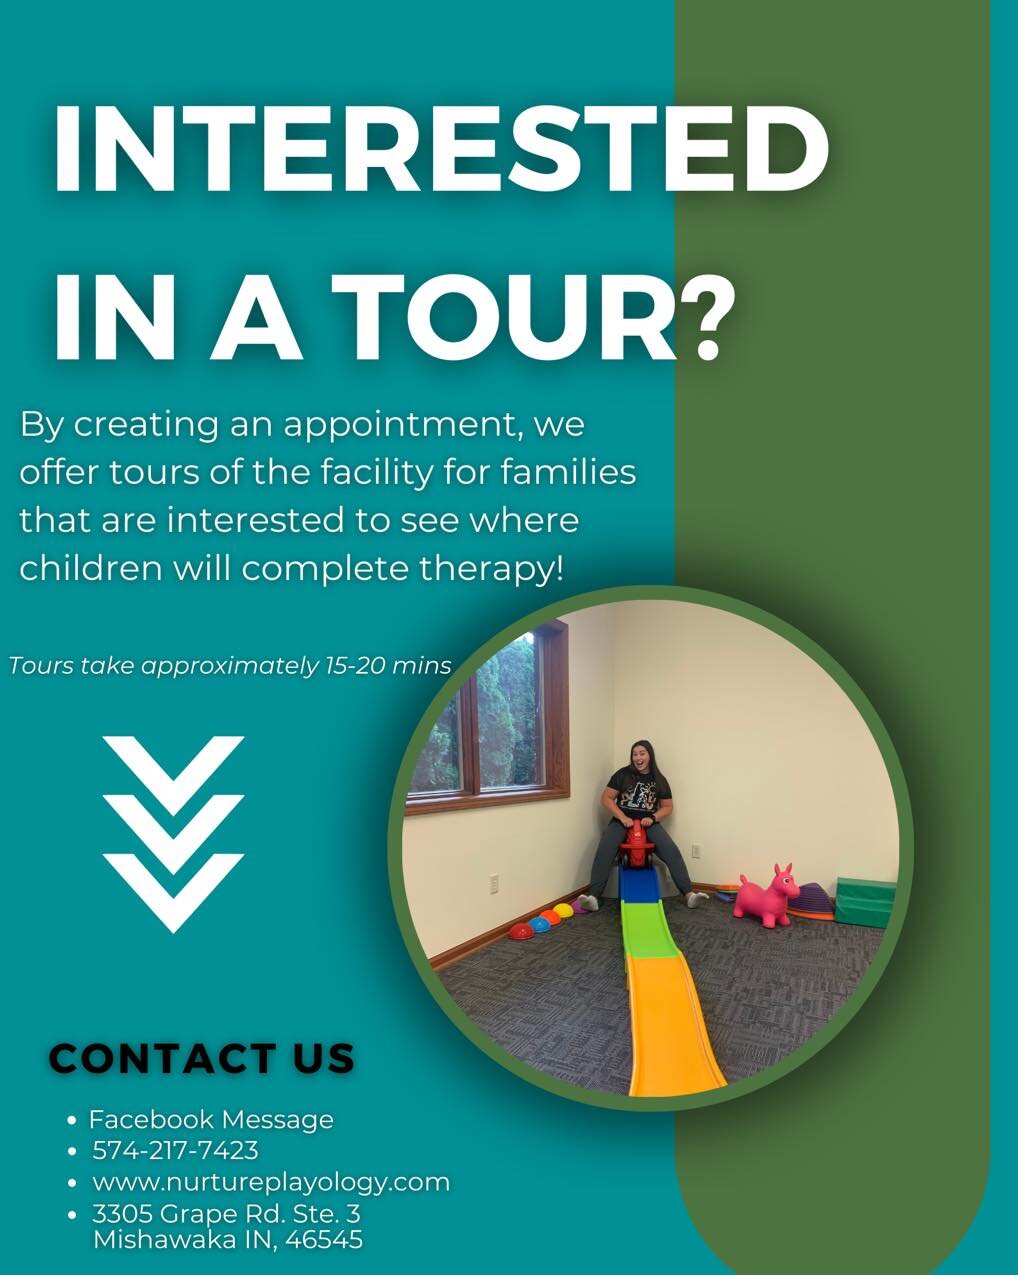 Did you know that we provide tours for families to view the facility with their child? If you or someone you know is interested in visiting our facility, have them reach out to us using the options at the bottom of this photo :)